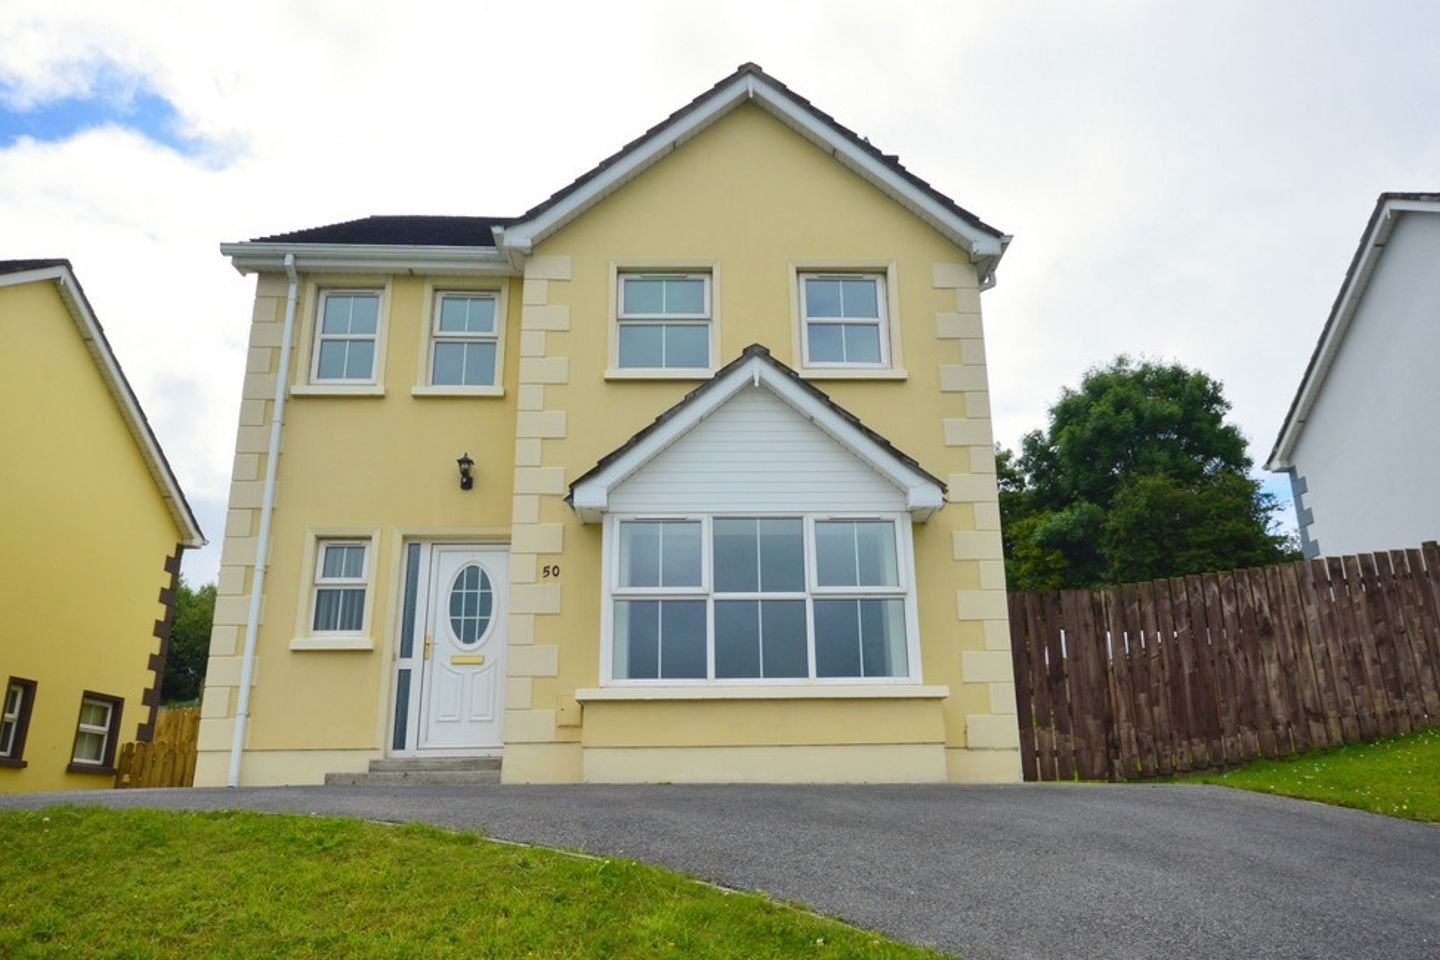 50 Saint Jude's Court, Lifford, Co. Donegal